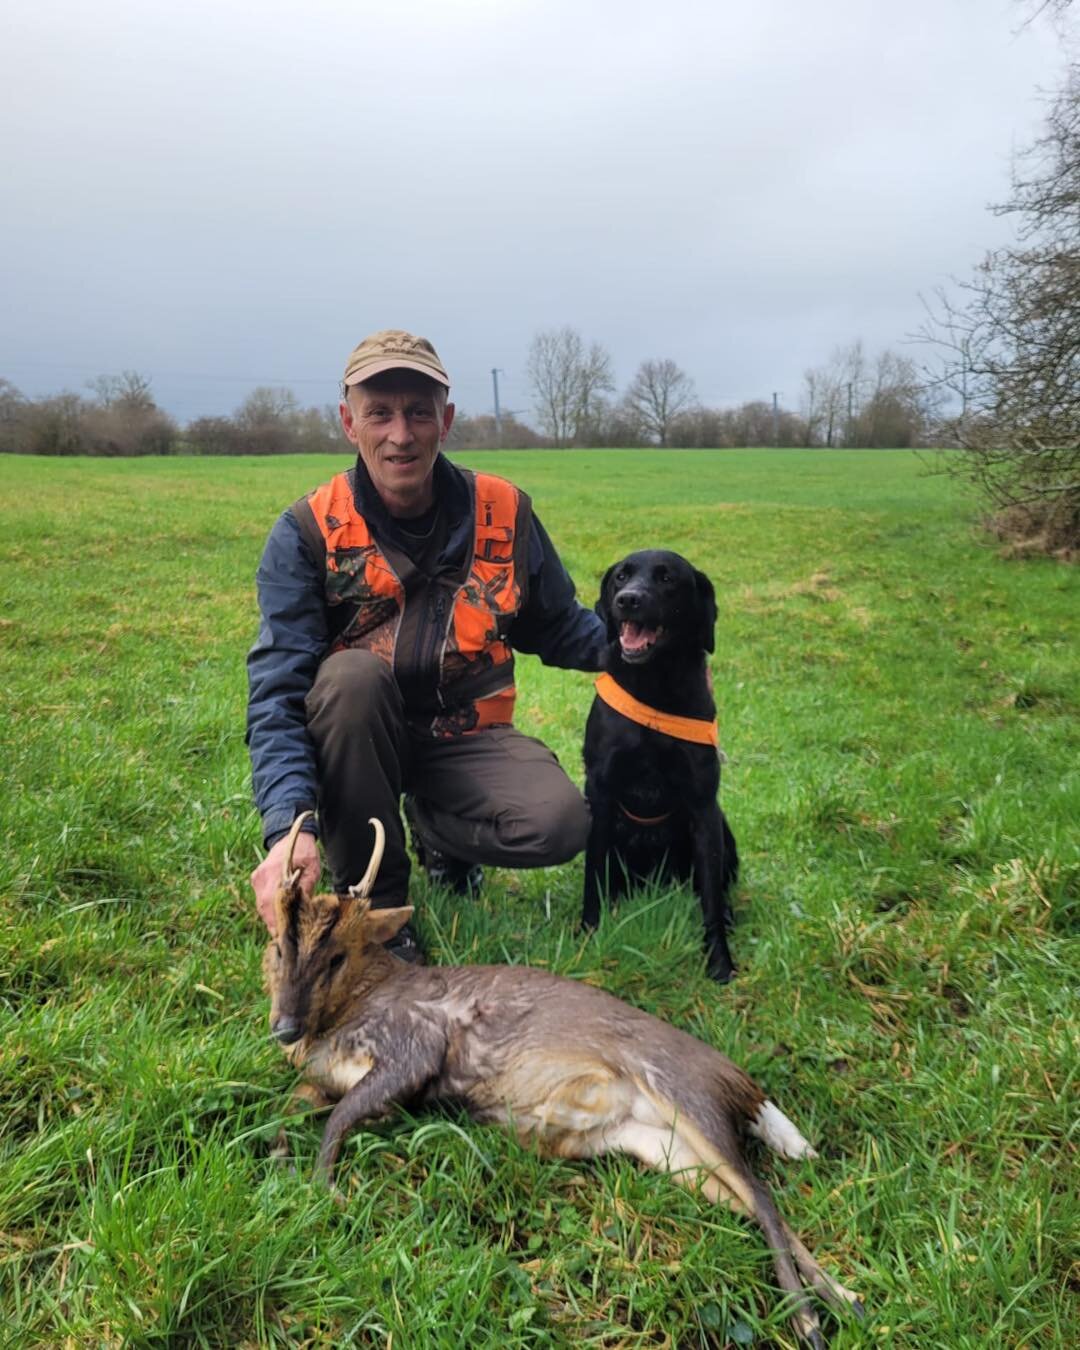 2 of the 3 recoveries for UKDTR tracking teams over the weekend..
Gareth Clarke and Wilson having a good couple of days..
Many thanks to the Stalkers for putting your trust in UKDTR 👏👏

To find a tracking team 🦌🐕🦌🐕
Click on the link 

https://w